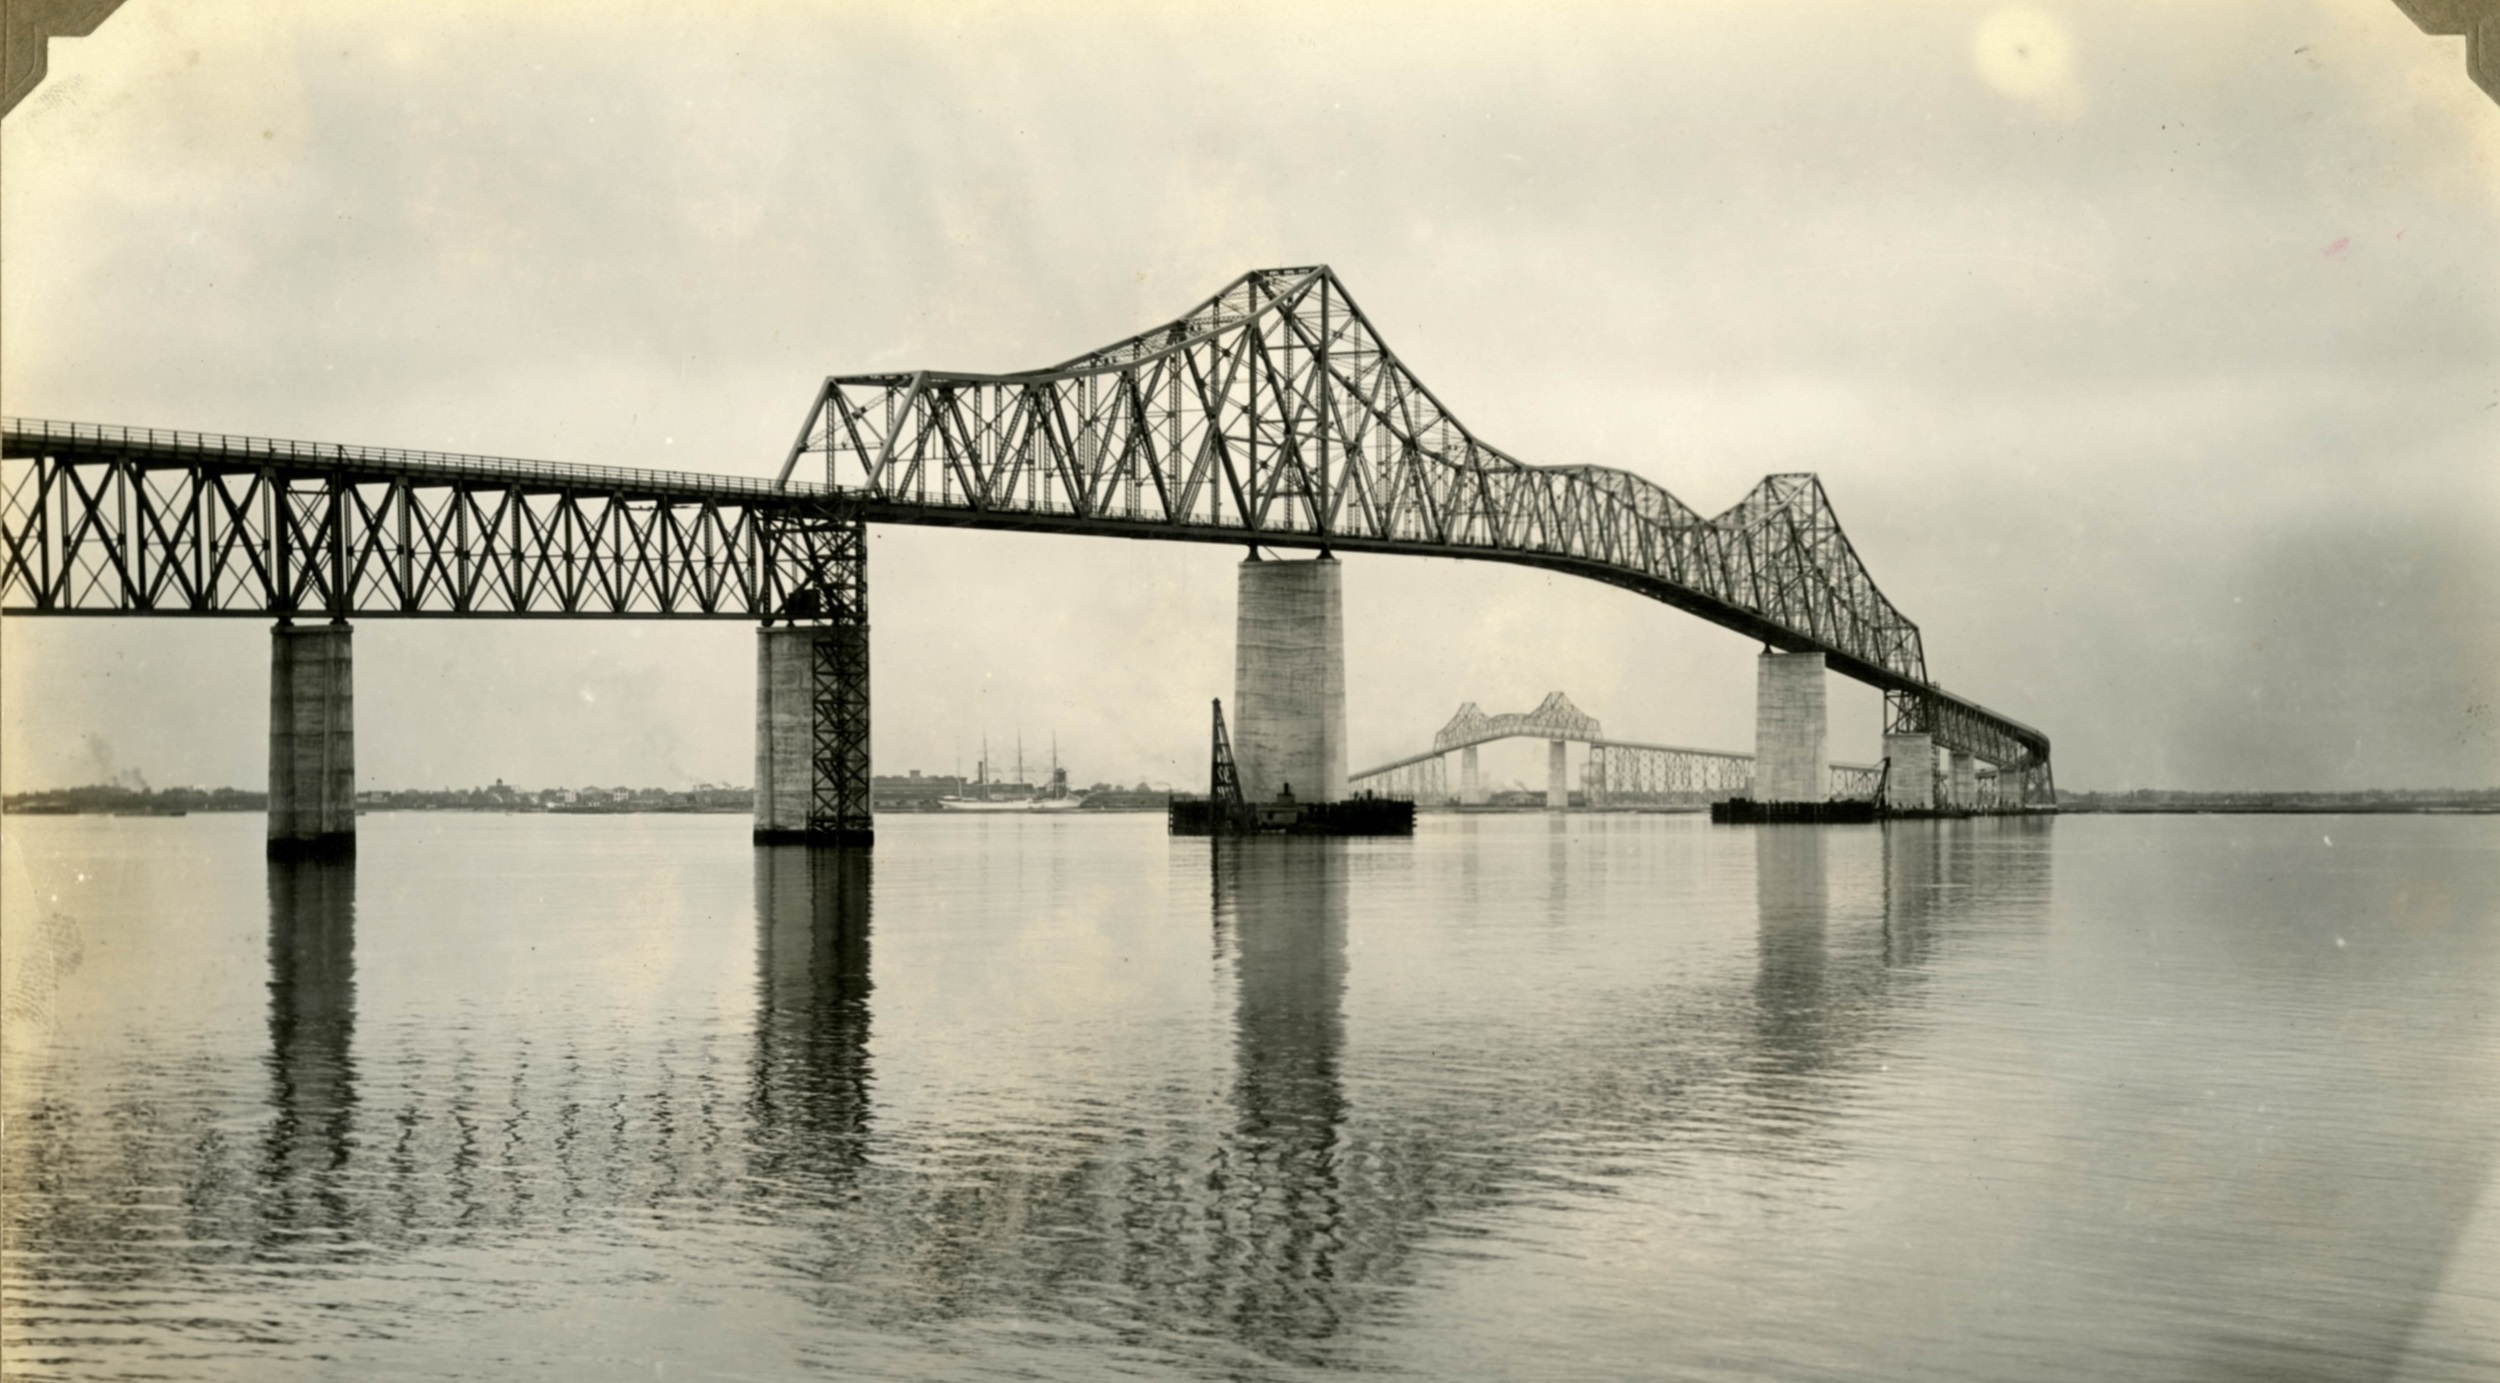 Photographic Record Of The Cooper River Bridge Lowcountry Digital Library